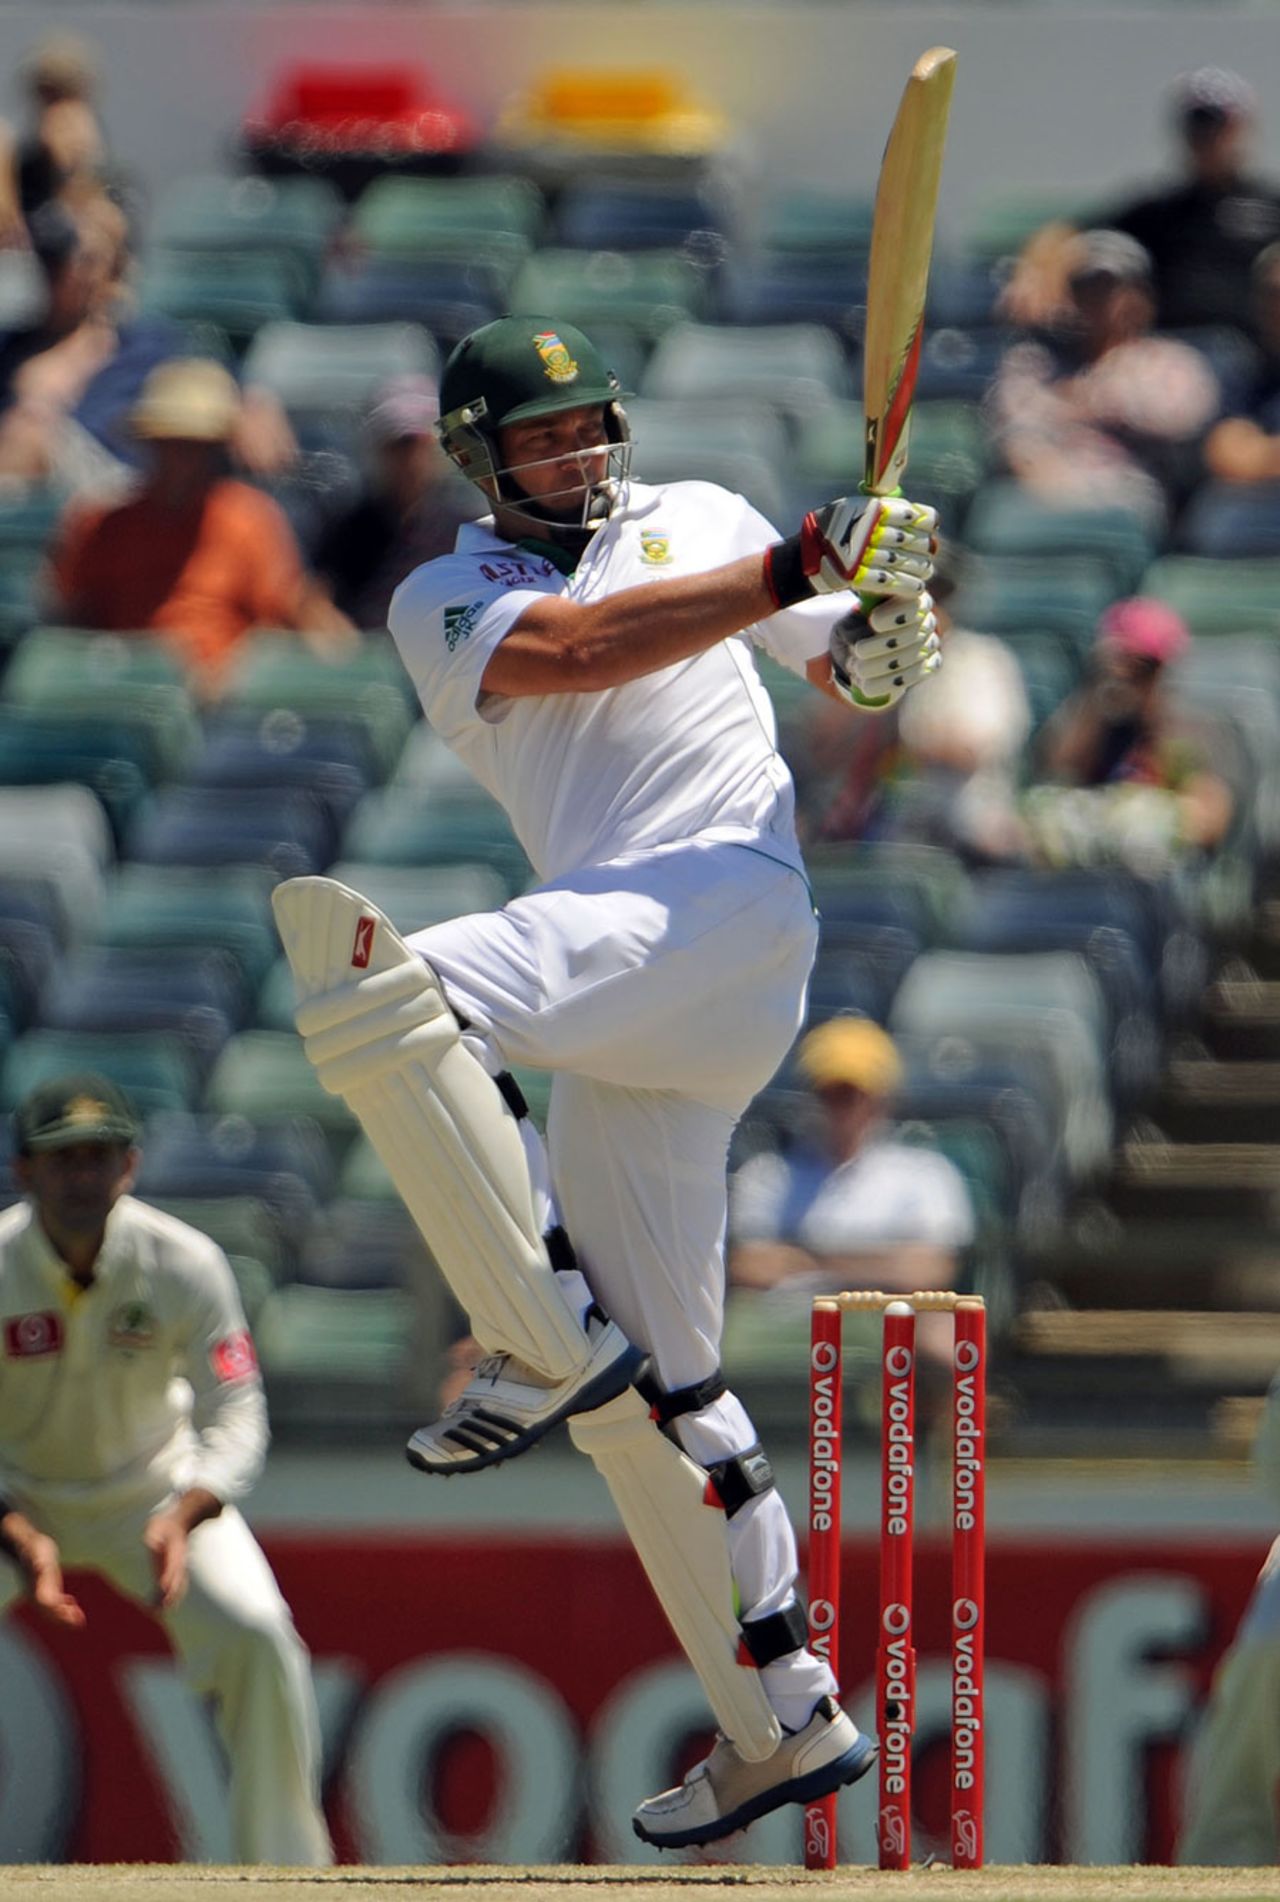 Jacques Kallis puts the ball away stylishly, Australia v South Africa, third Test, day three, Perth, December 2, 2012